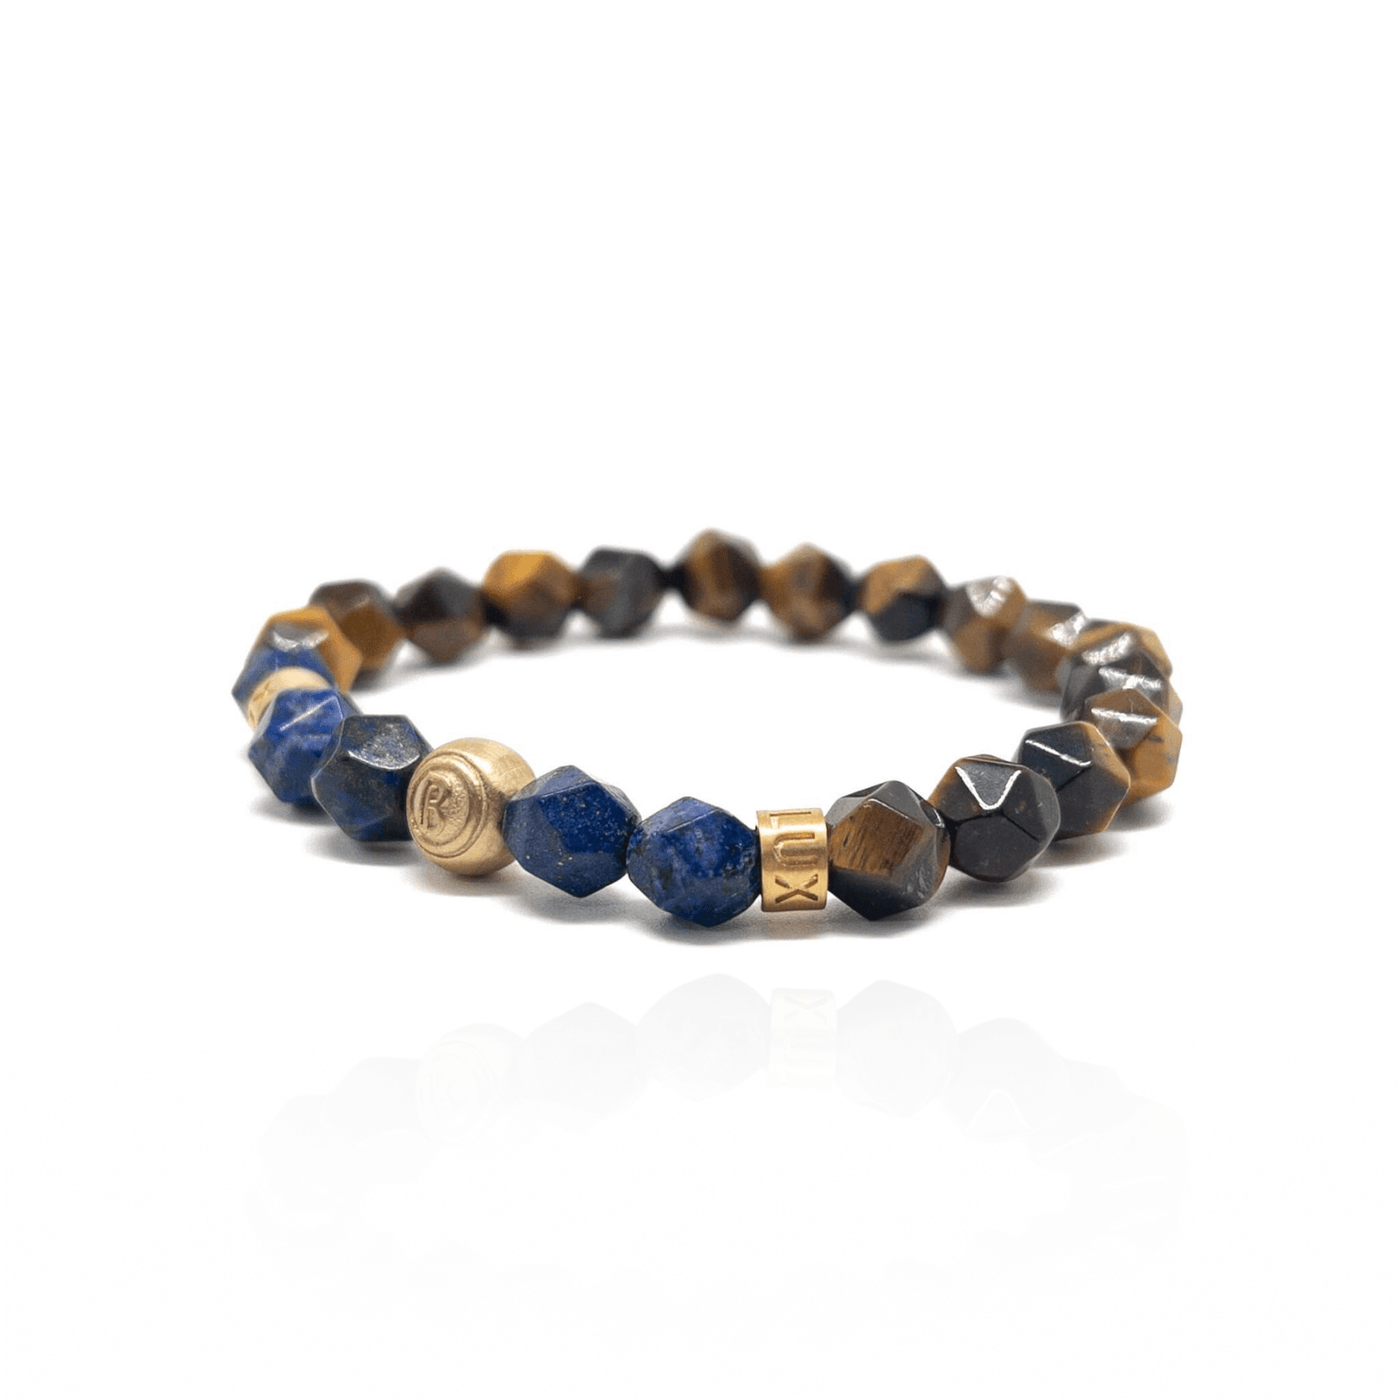 The Faceted Brown Tiger eye and Lapis Lazuli Signed Bracelet